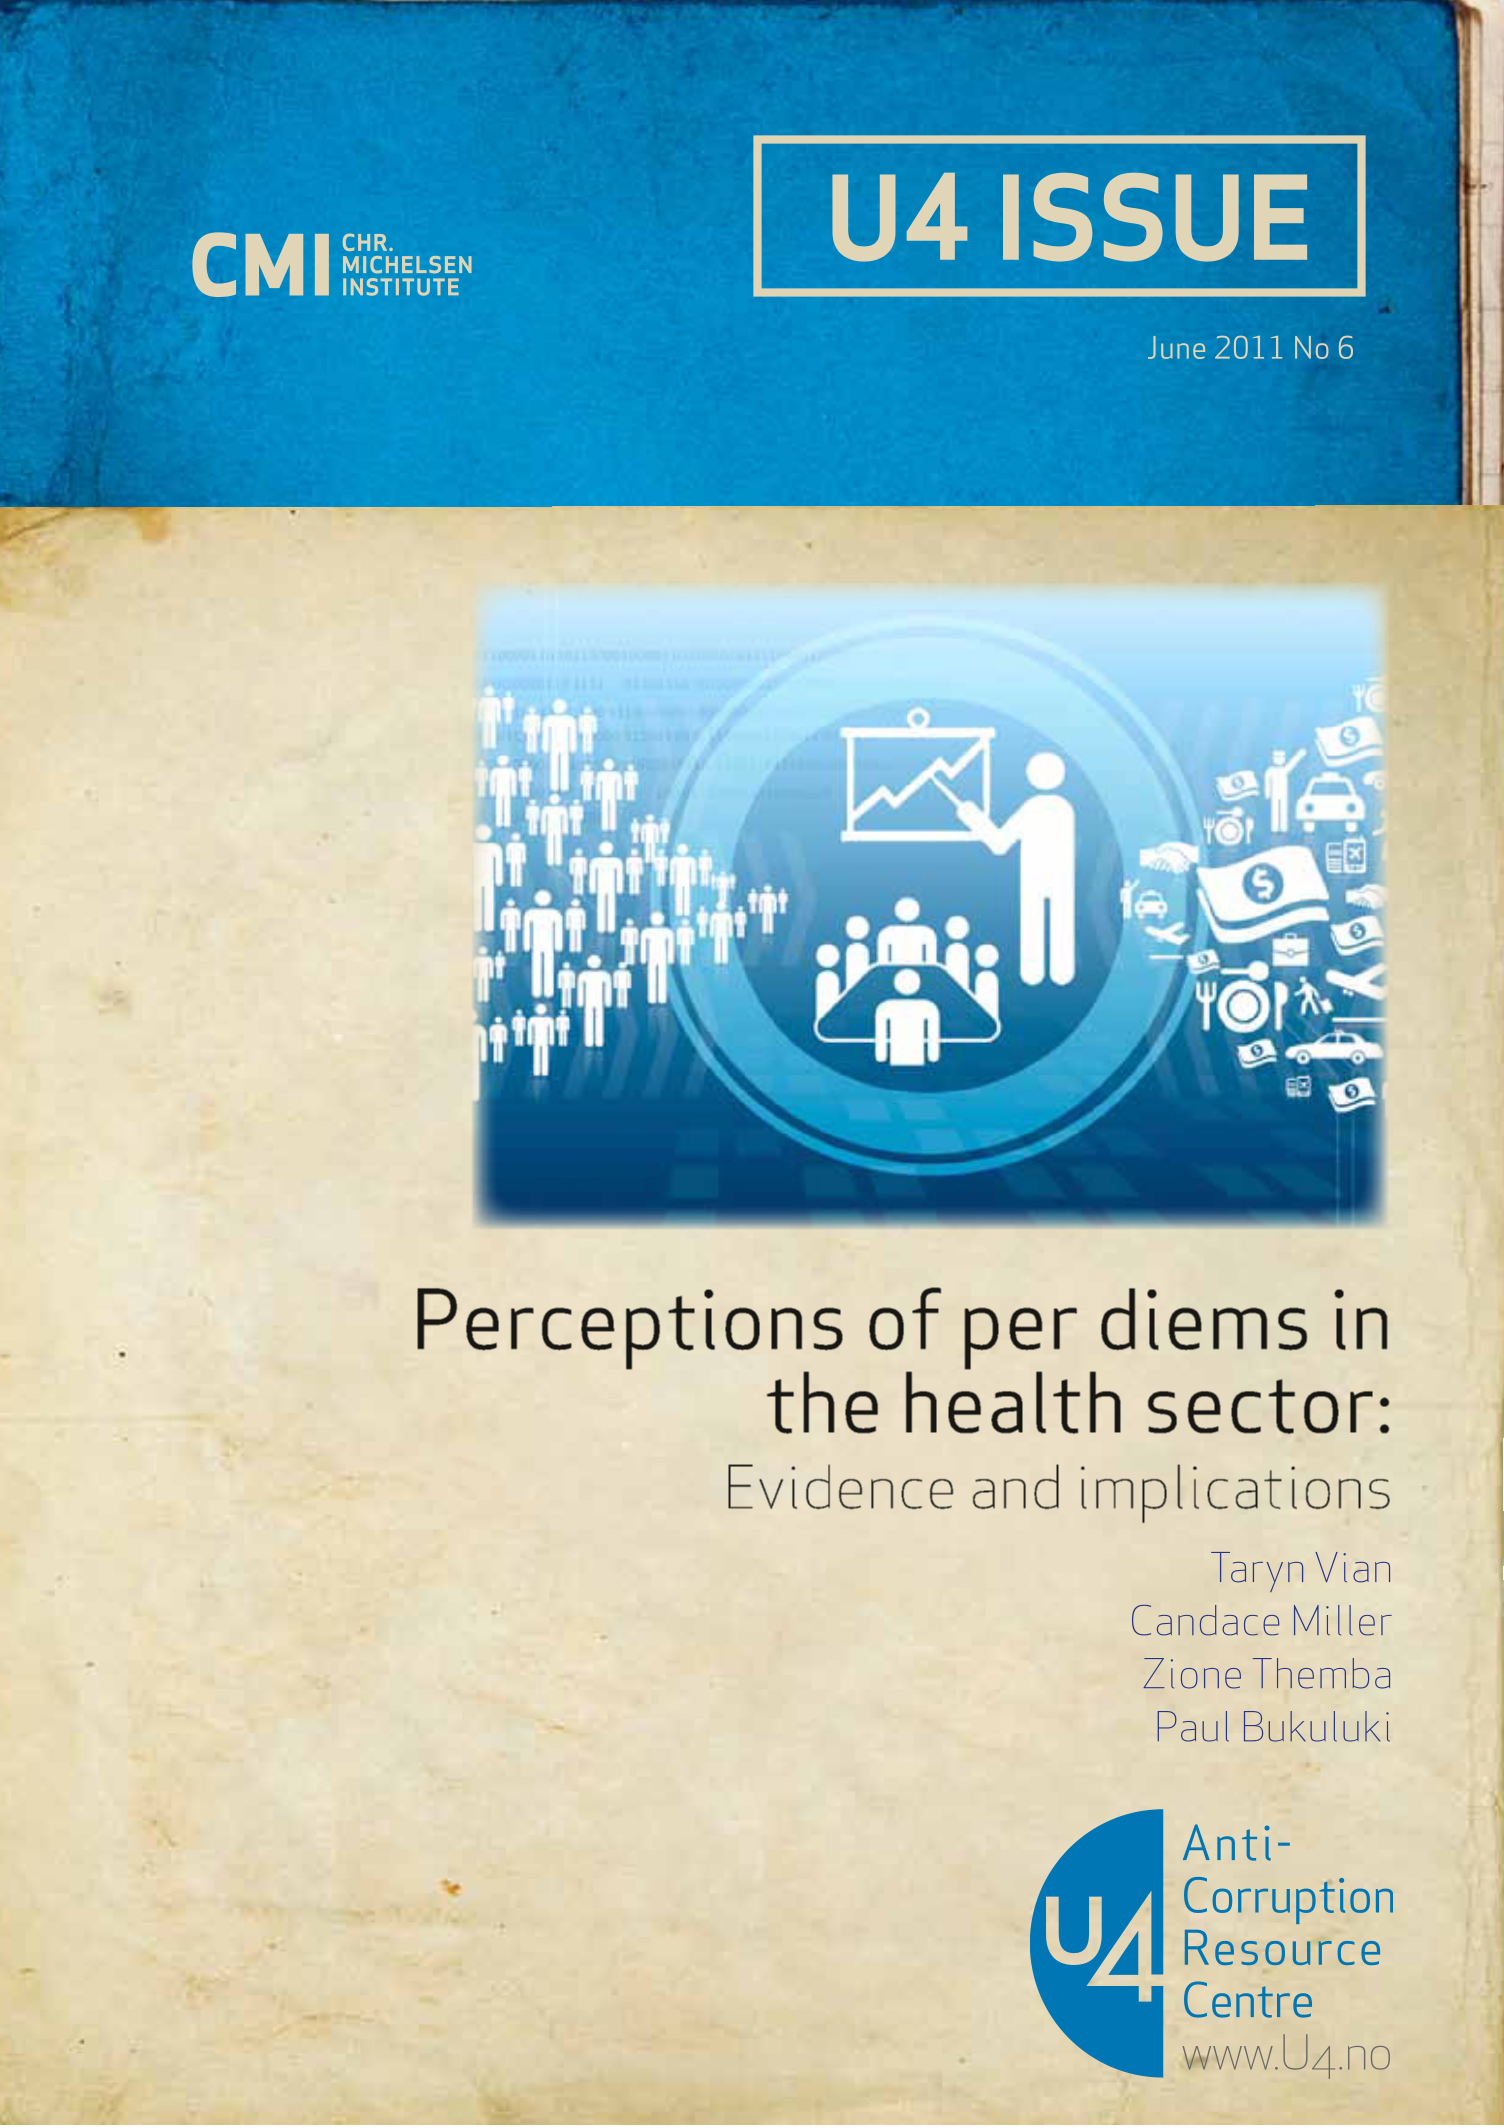 Perceptions of per diems in the health sector: Evidence and implications